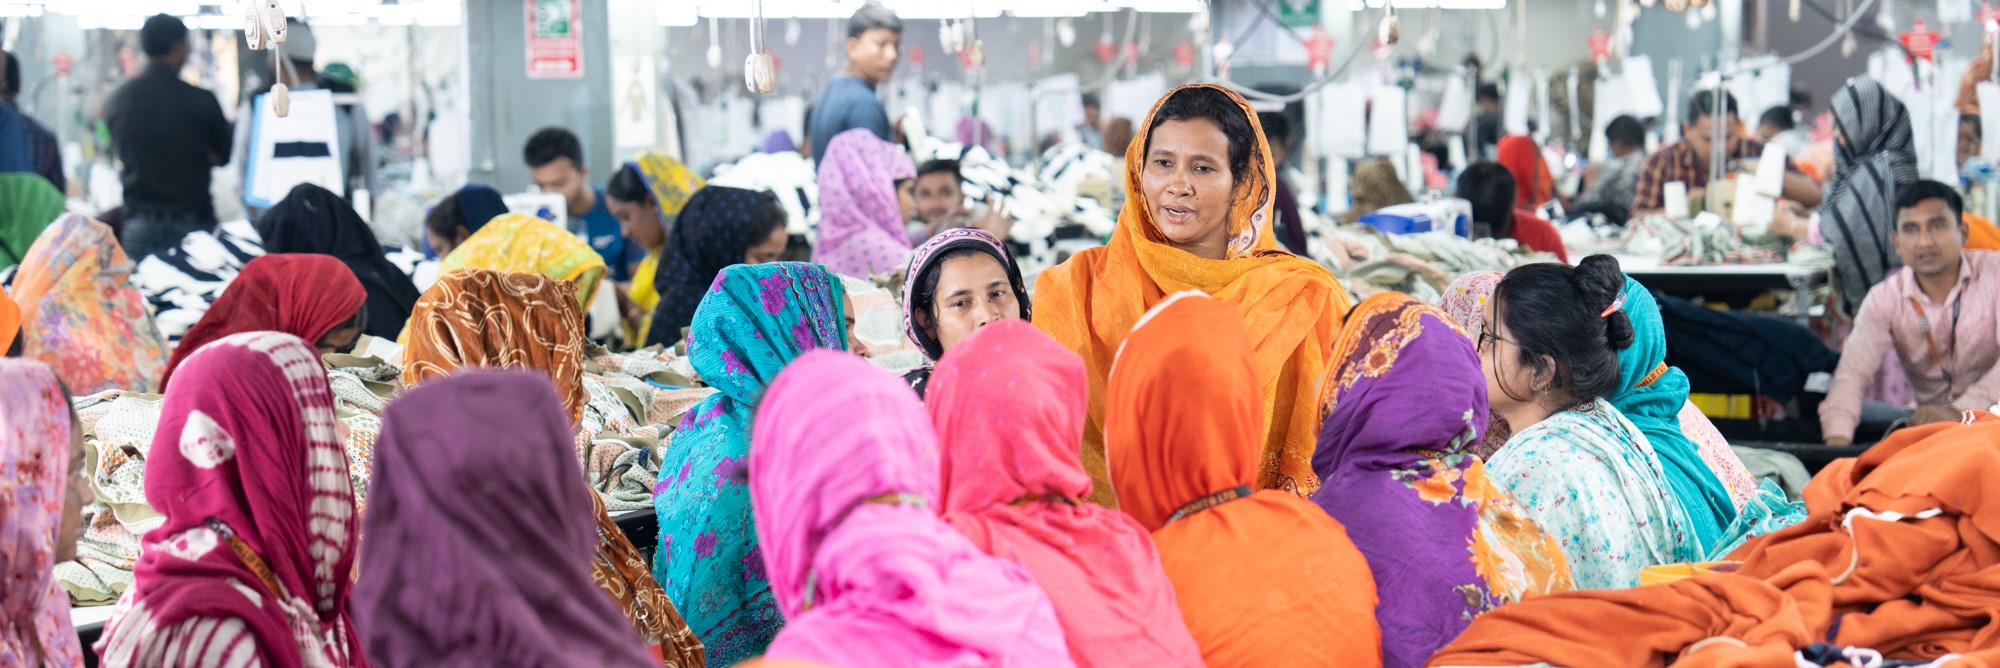 RISE: A Reflection on Women’s Advancement Beyond Supervisory Roles in the Garment Industry 